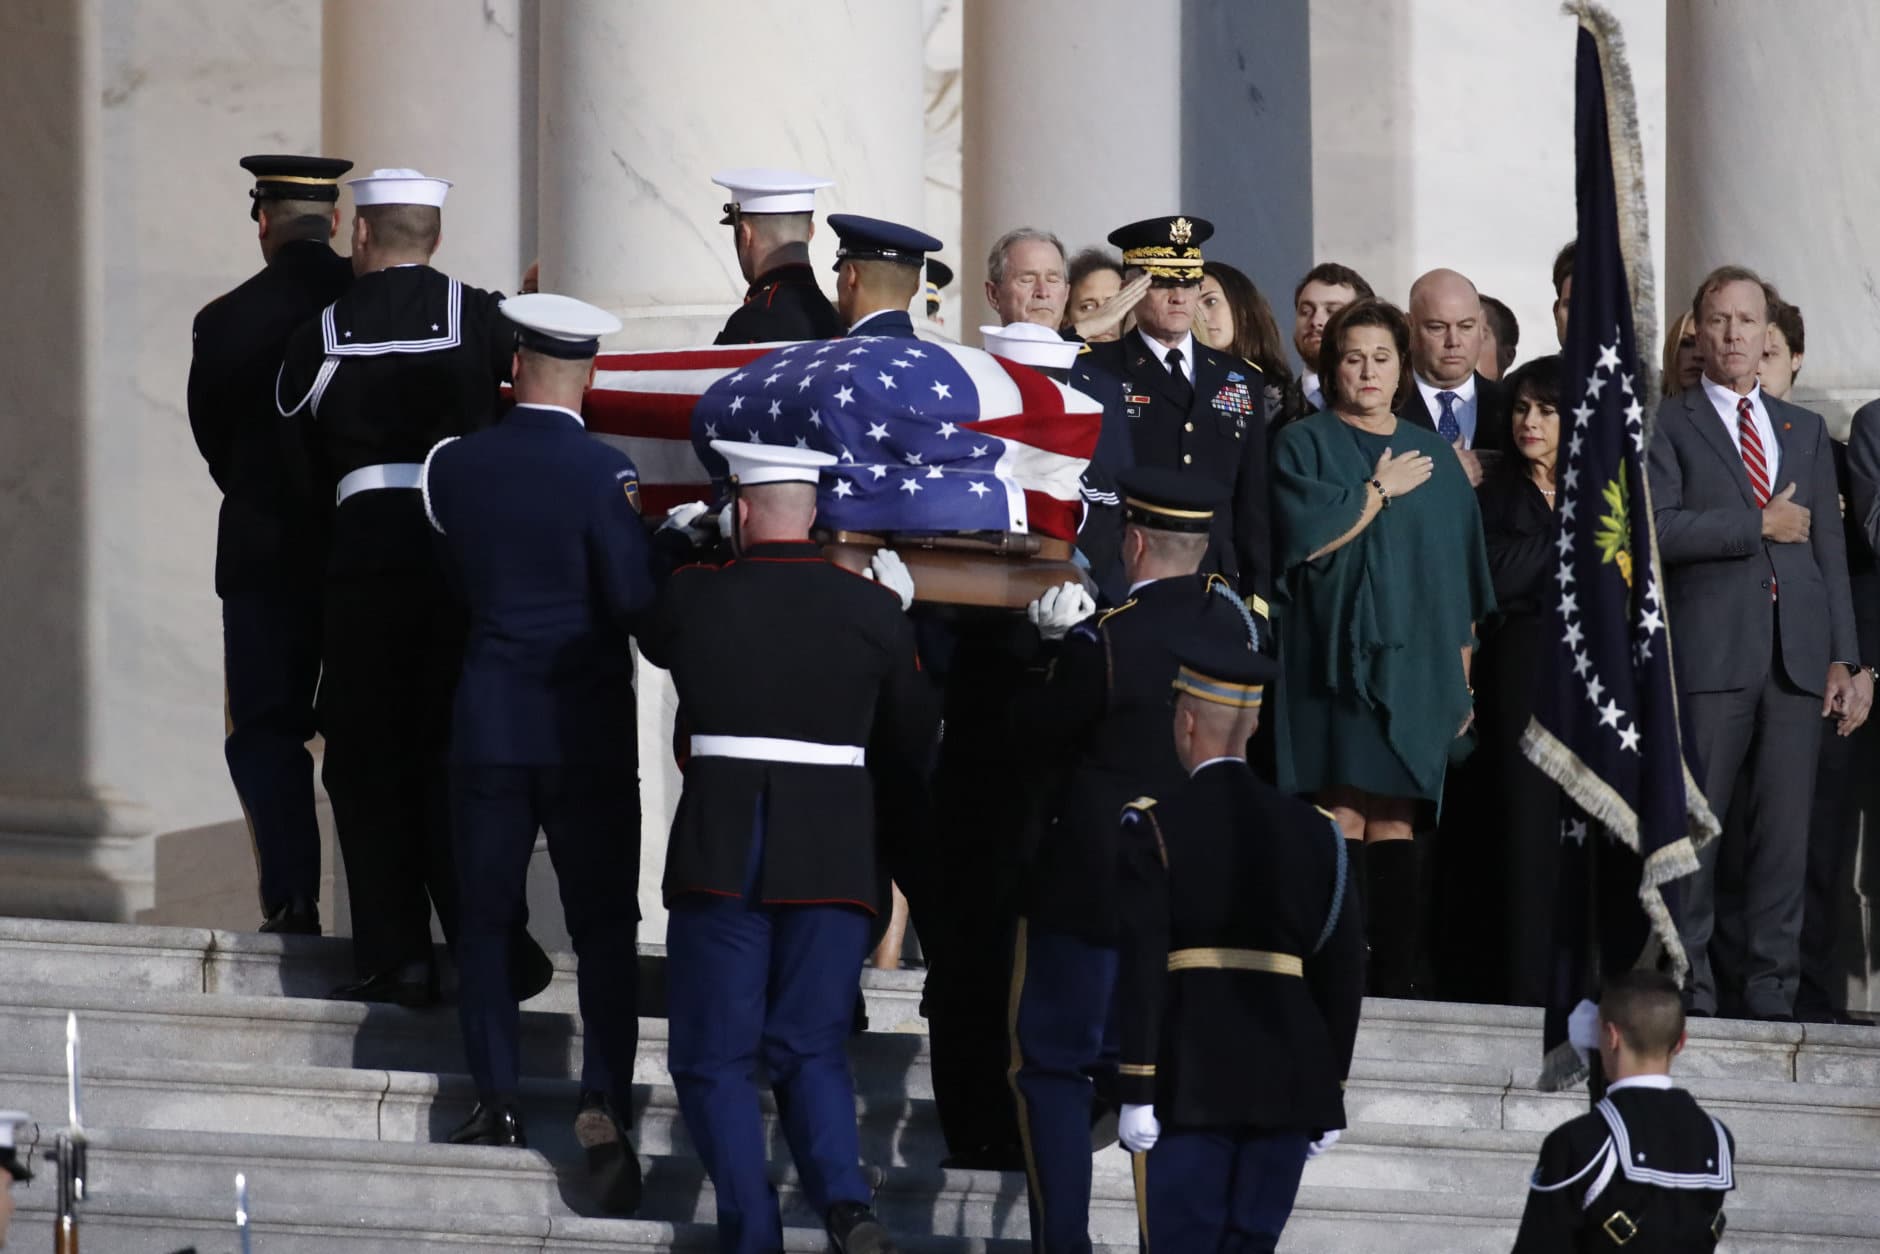 The flag-draped casket of former President George H.W. Bush is carried by a joint services military honor guard to lie in state in the rotunda of the U.S. Capitol, Monday, Dec. 3, 2018, in Washington. (AP Photo/Alex Brandon, Pool)